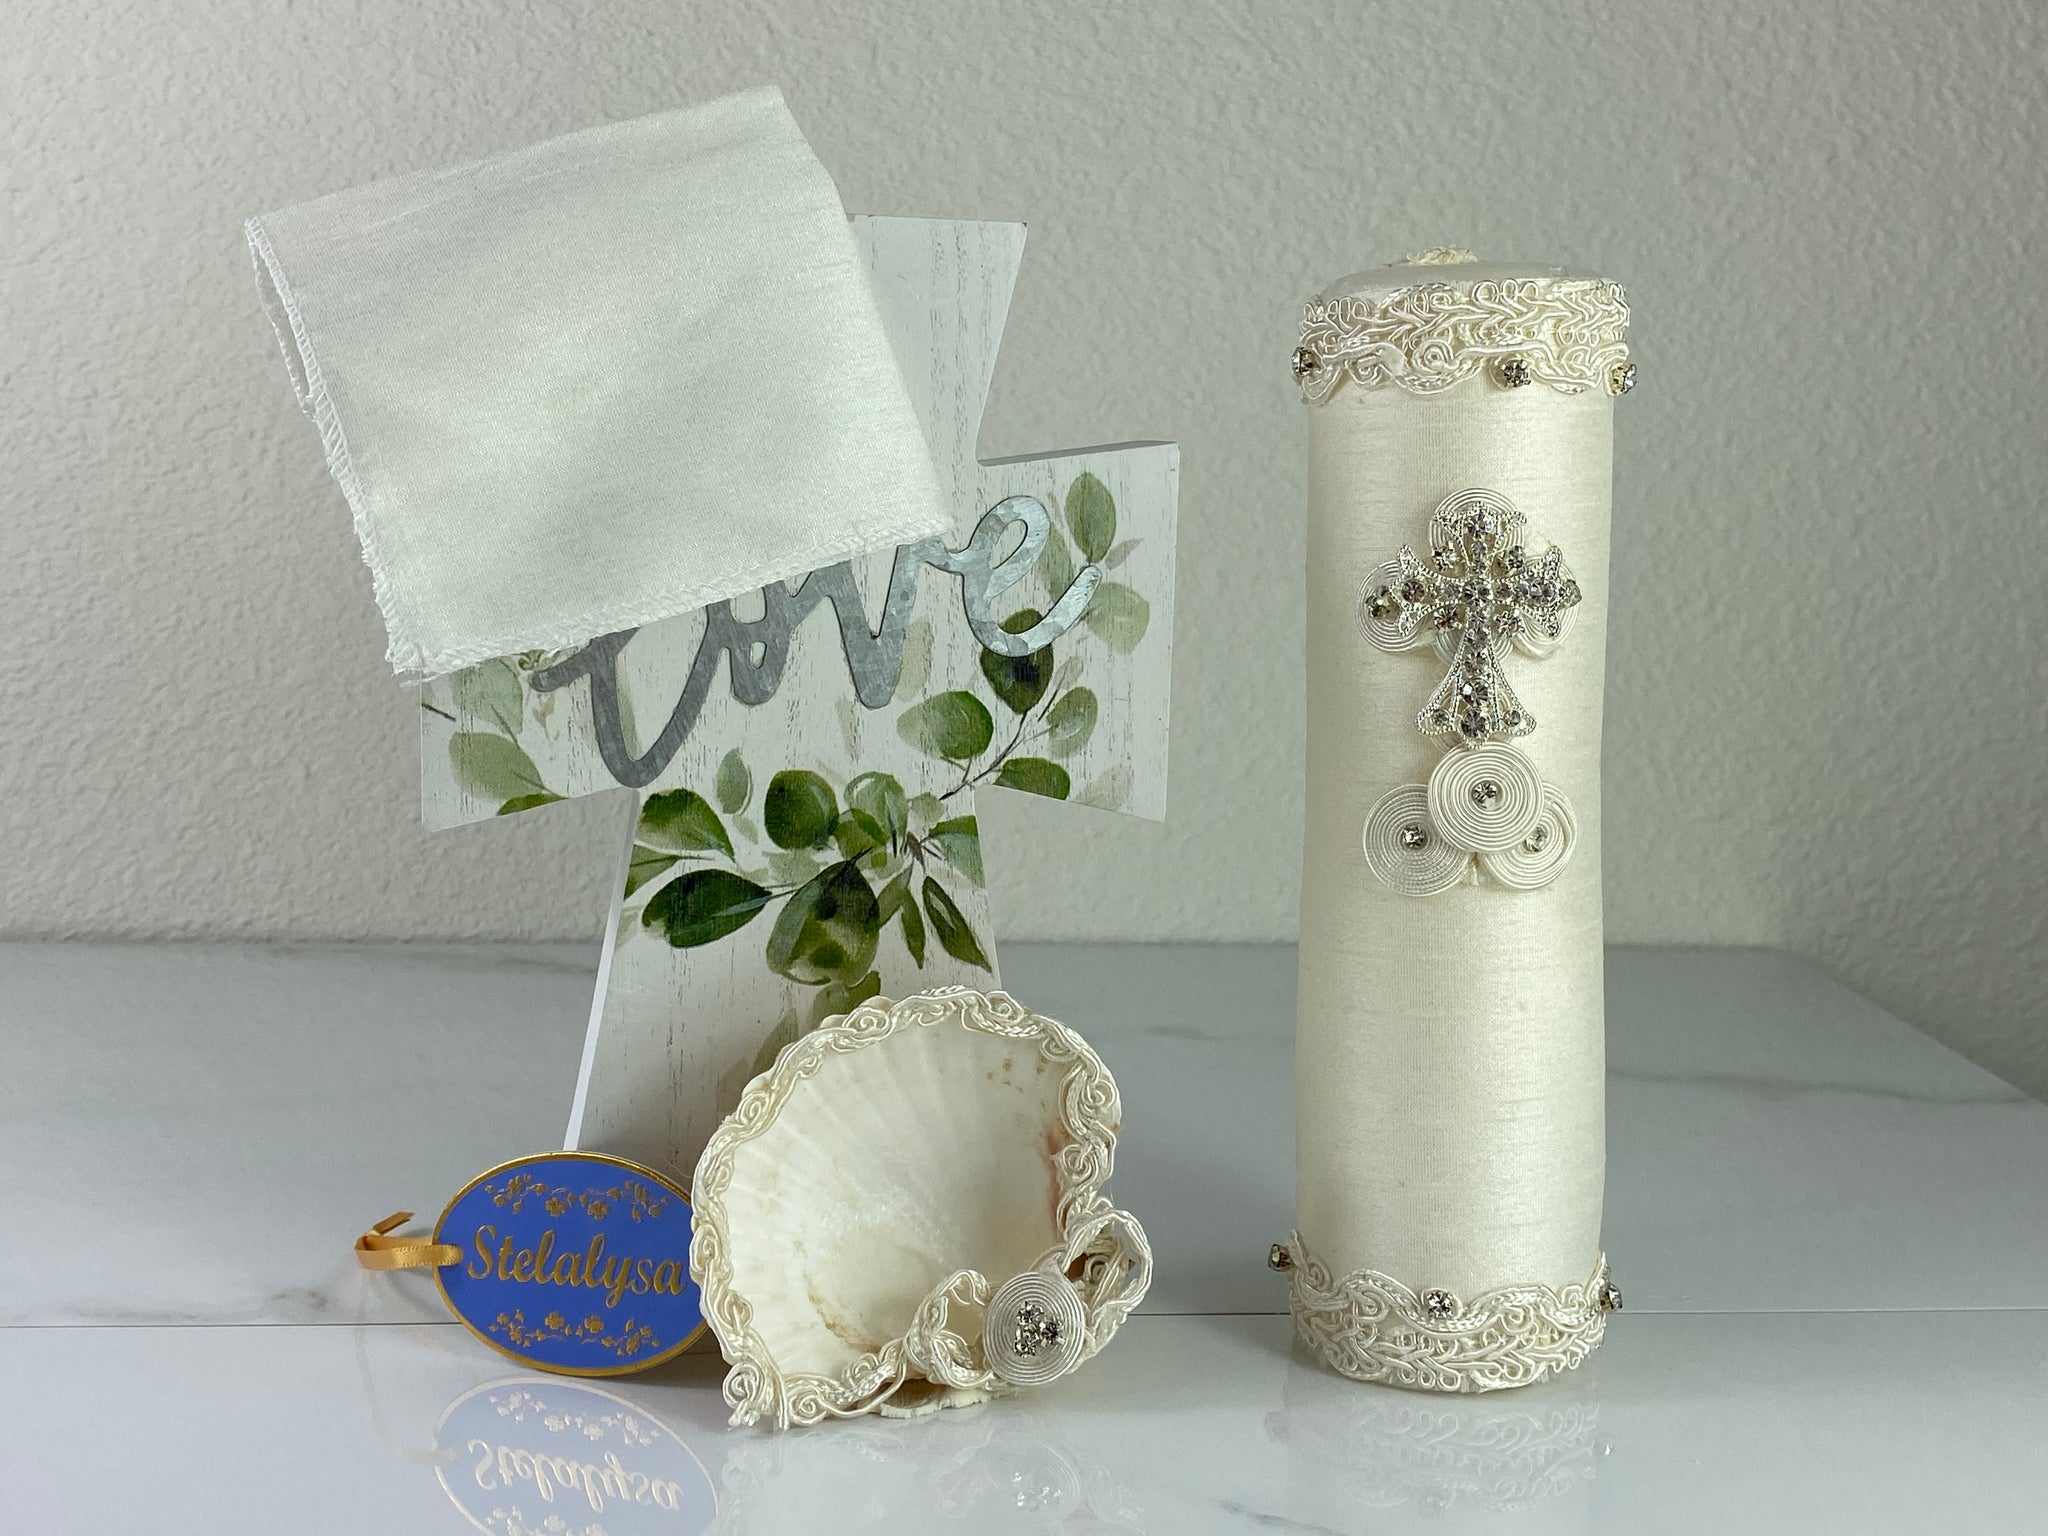 These one-of-a-kind Candle set is handmade and ivory in color.  This candle has a classic look.   It is uniquely decorated with crystals, lace, cross, and tassels making it a gorgeous keepsake.   This candle is cylinder in shape and matches many outfits from the Boys' Baptism Collection.    To match, the Shell is put together piece by piece to compliment the Candle and Handkerchief.  